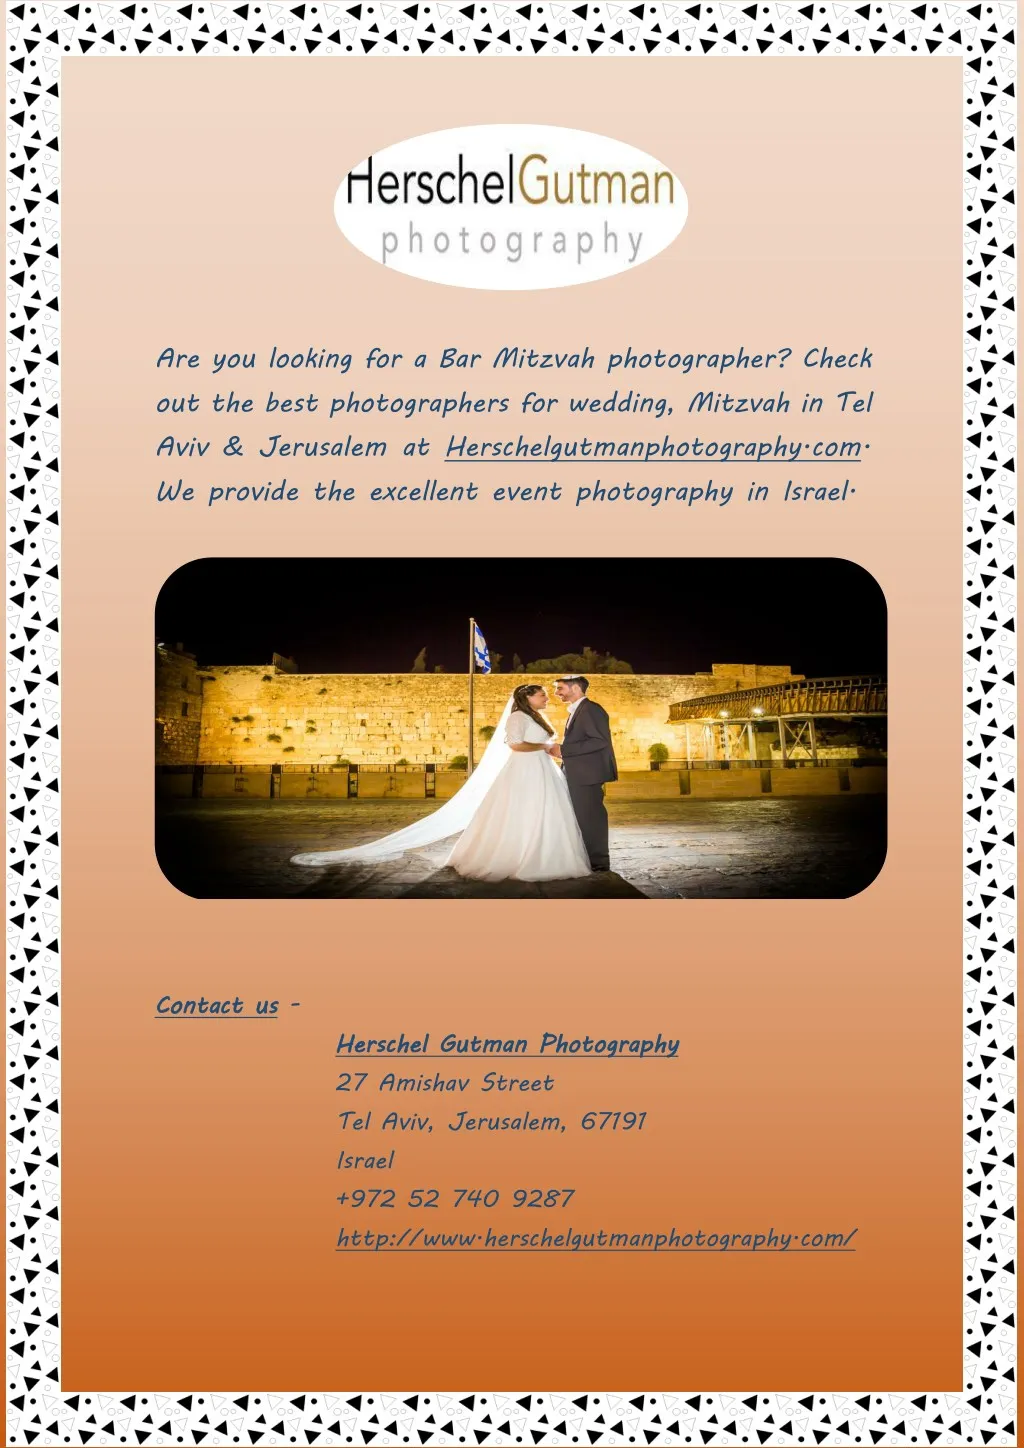 are you looking for a bar mitzvah photographer